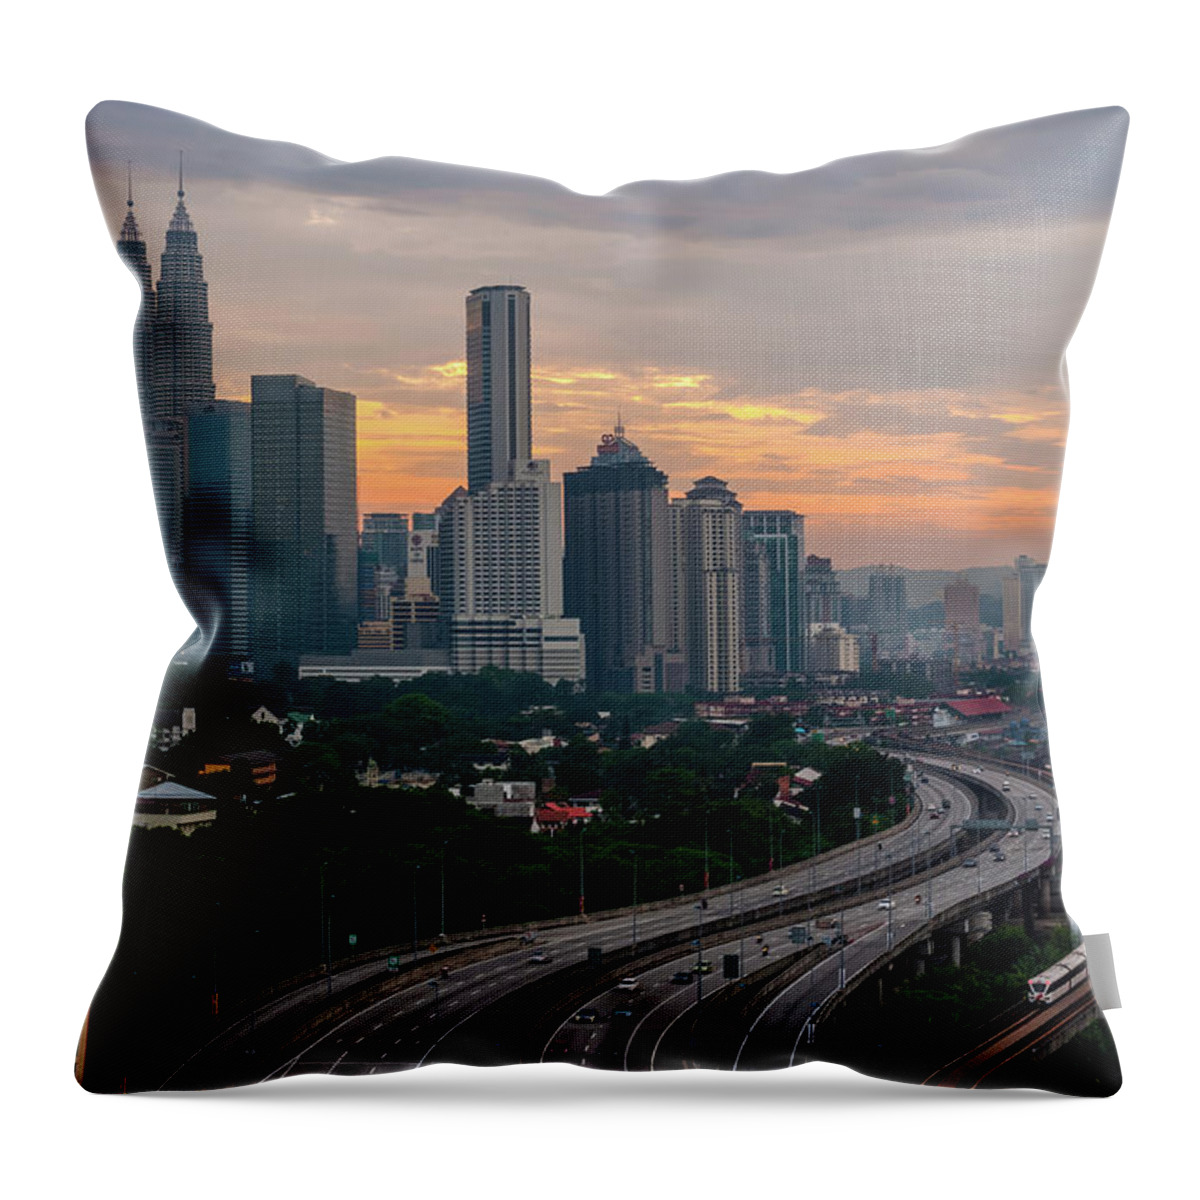 Train Throw Pillow featuring the photograph Big Picture Klcc Skyline by Azirull Amin Aripin